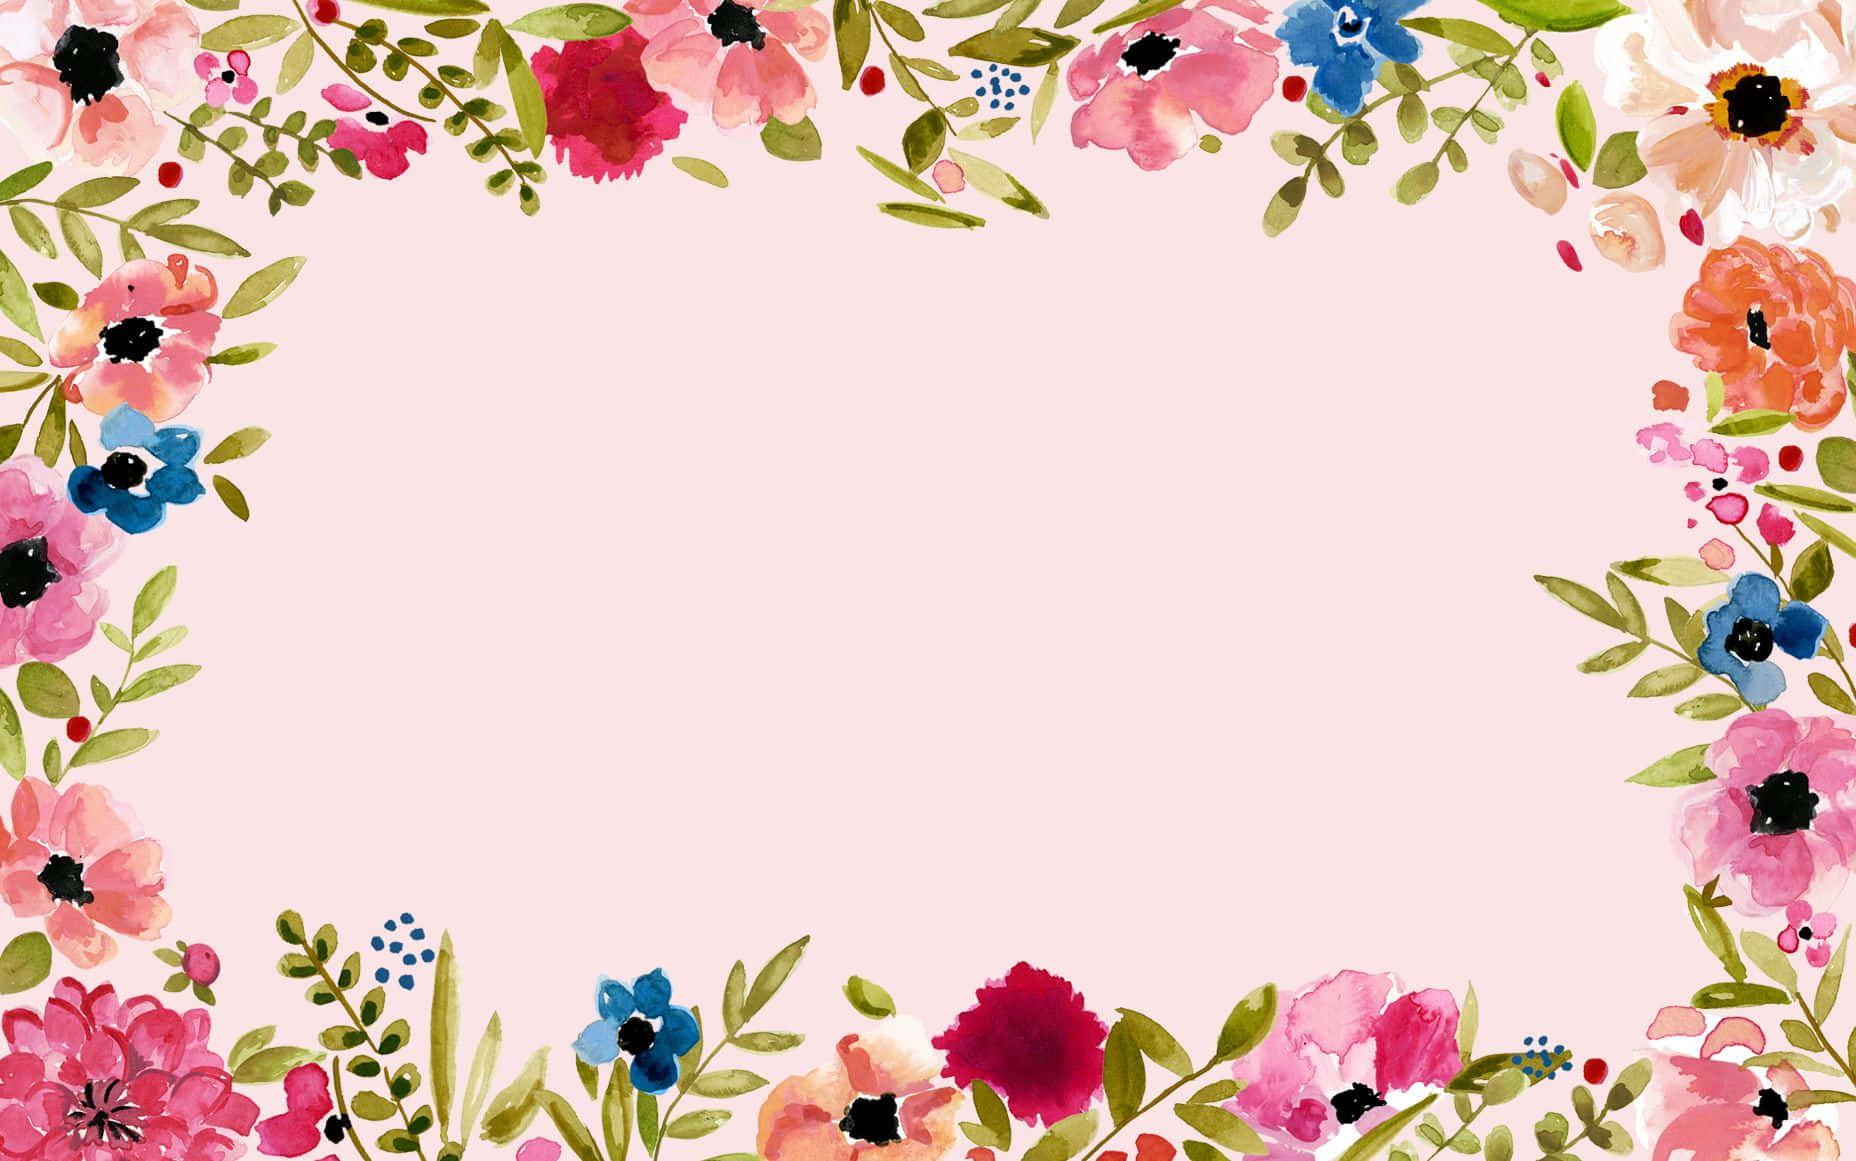 "Stay organized and bring a touch of nature to your workplace with Floral Computer!" Wallpaper